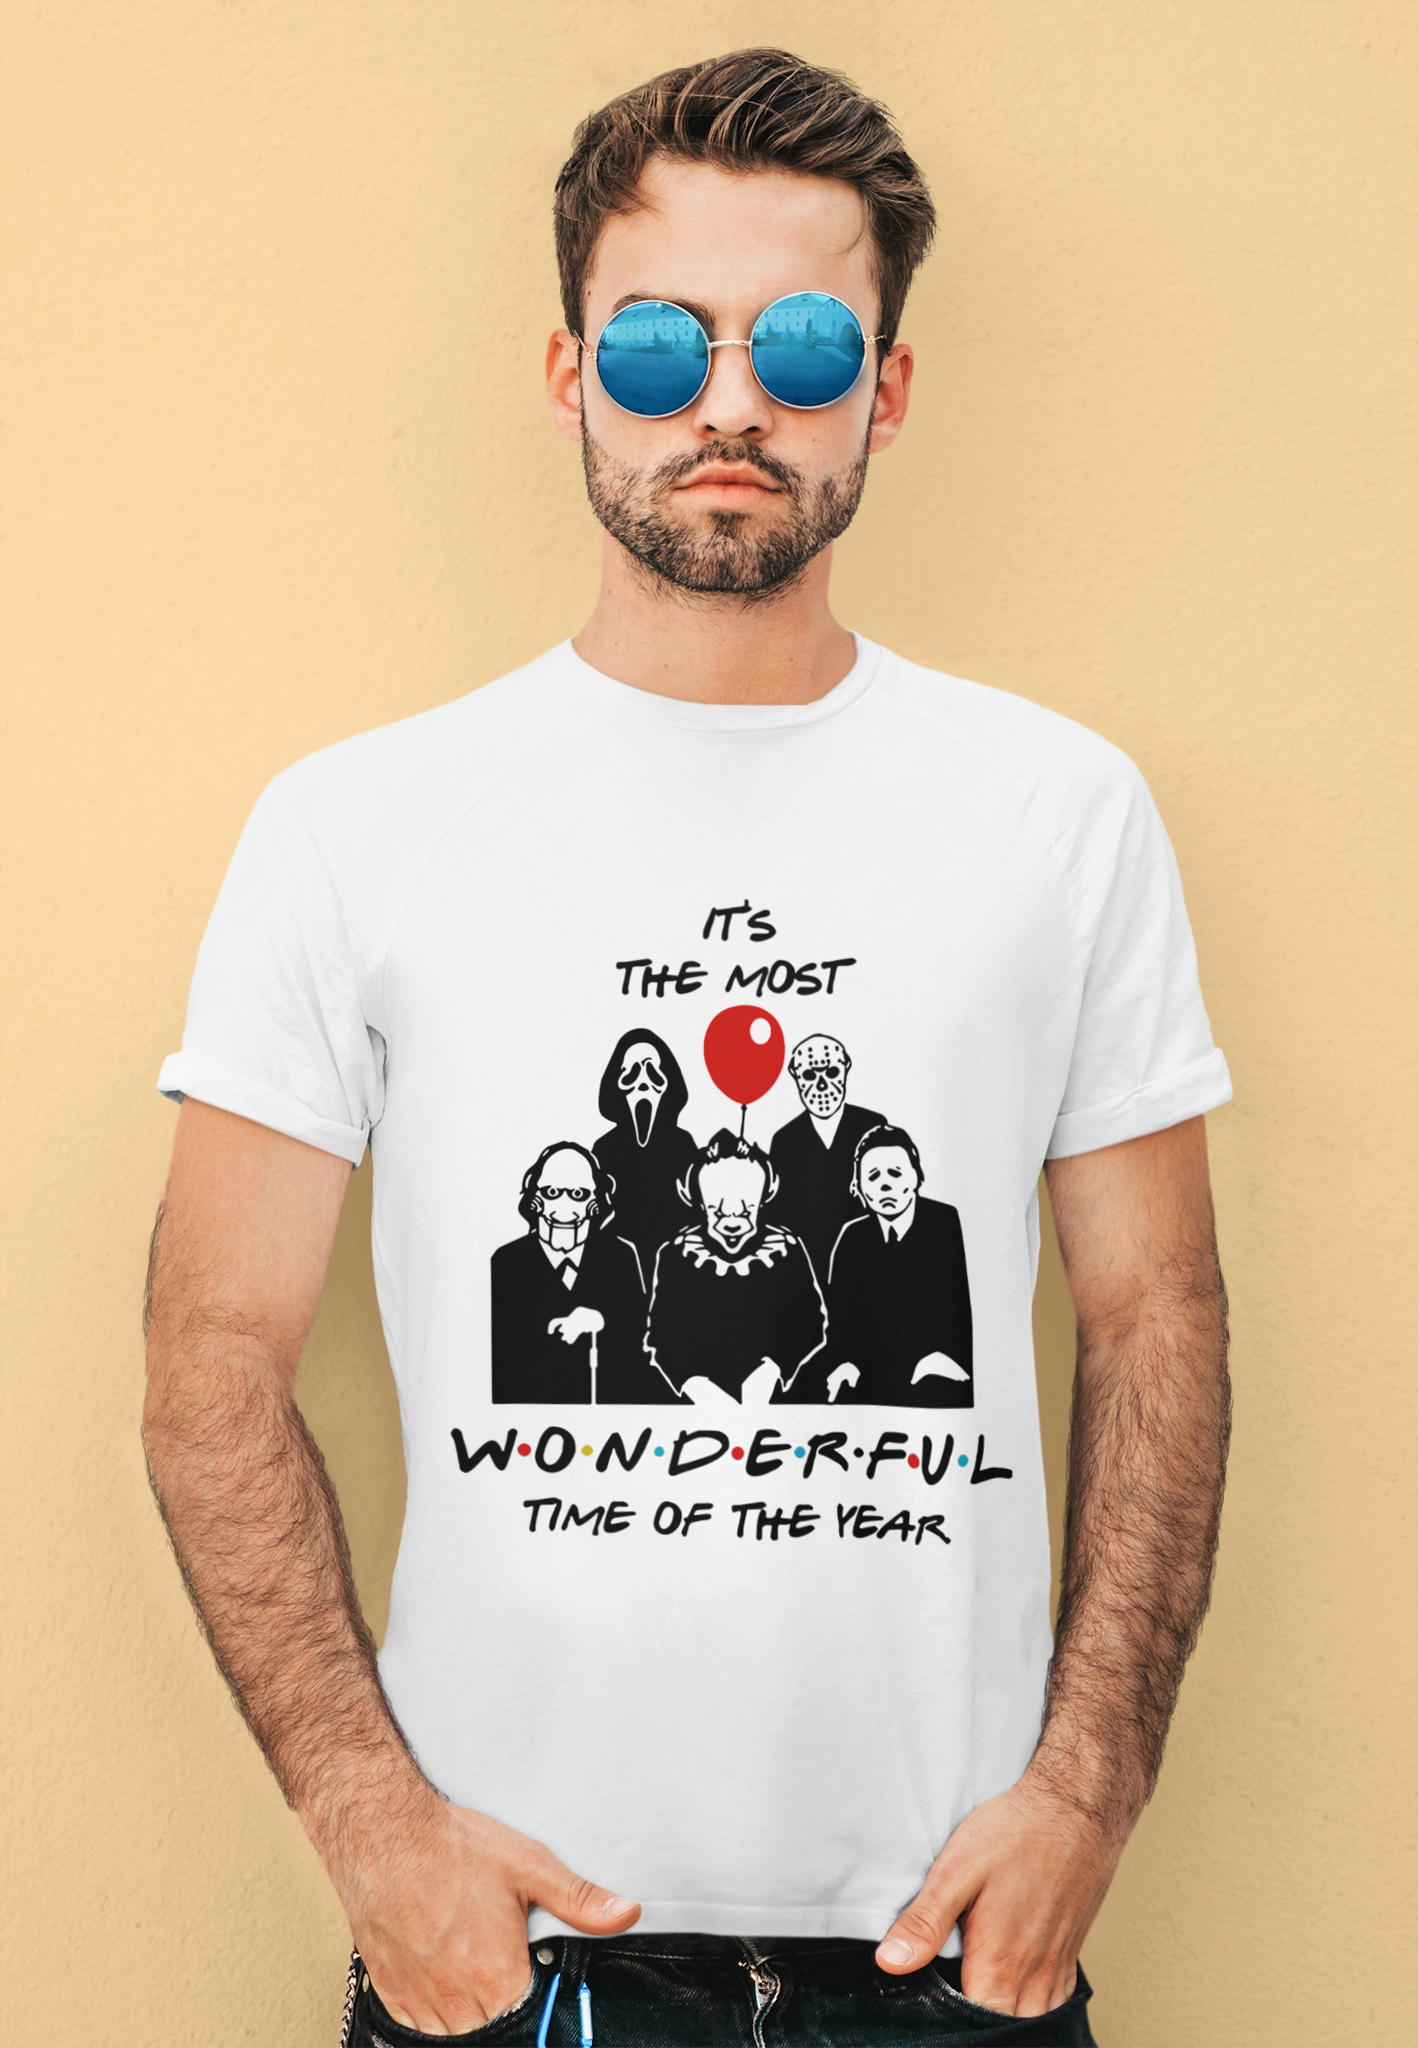 Horror Movie Characters T Shirt, Its The Most Wonderful Time Of The Year Tshirt, Pennywise Jason Voorhees T Shirt, Halloween Gifts